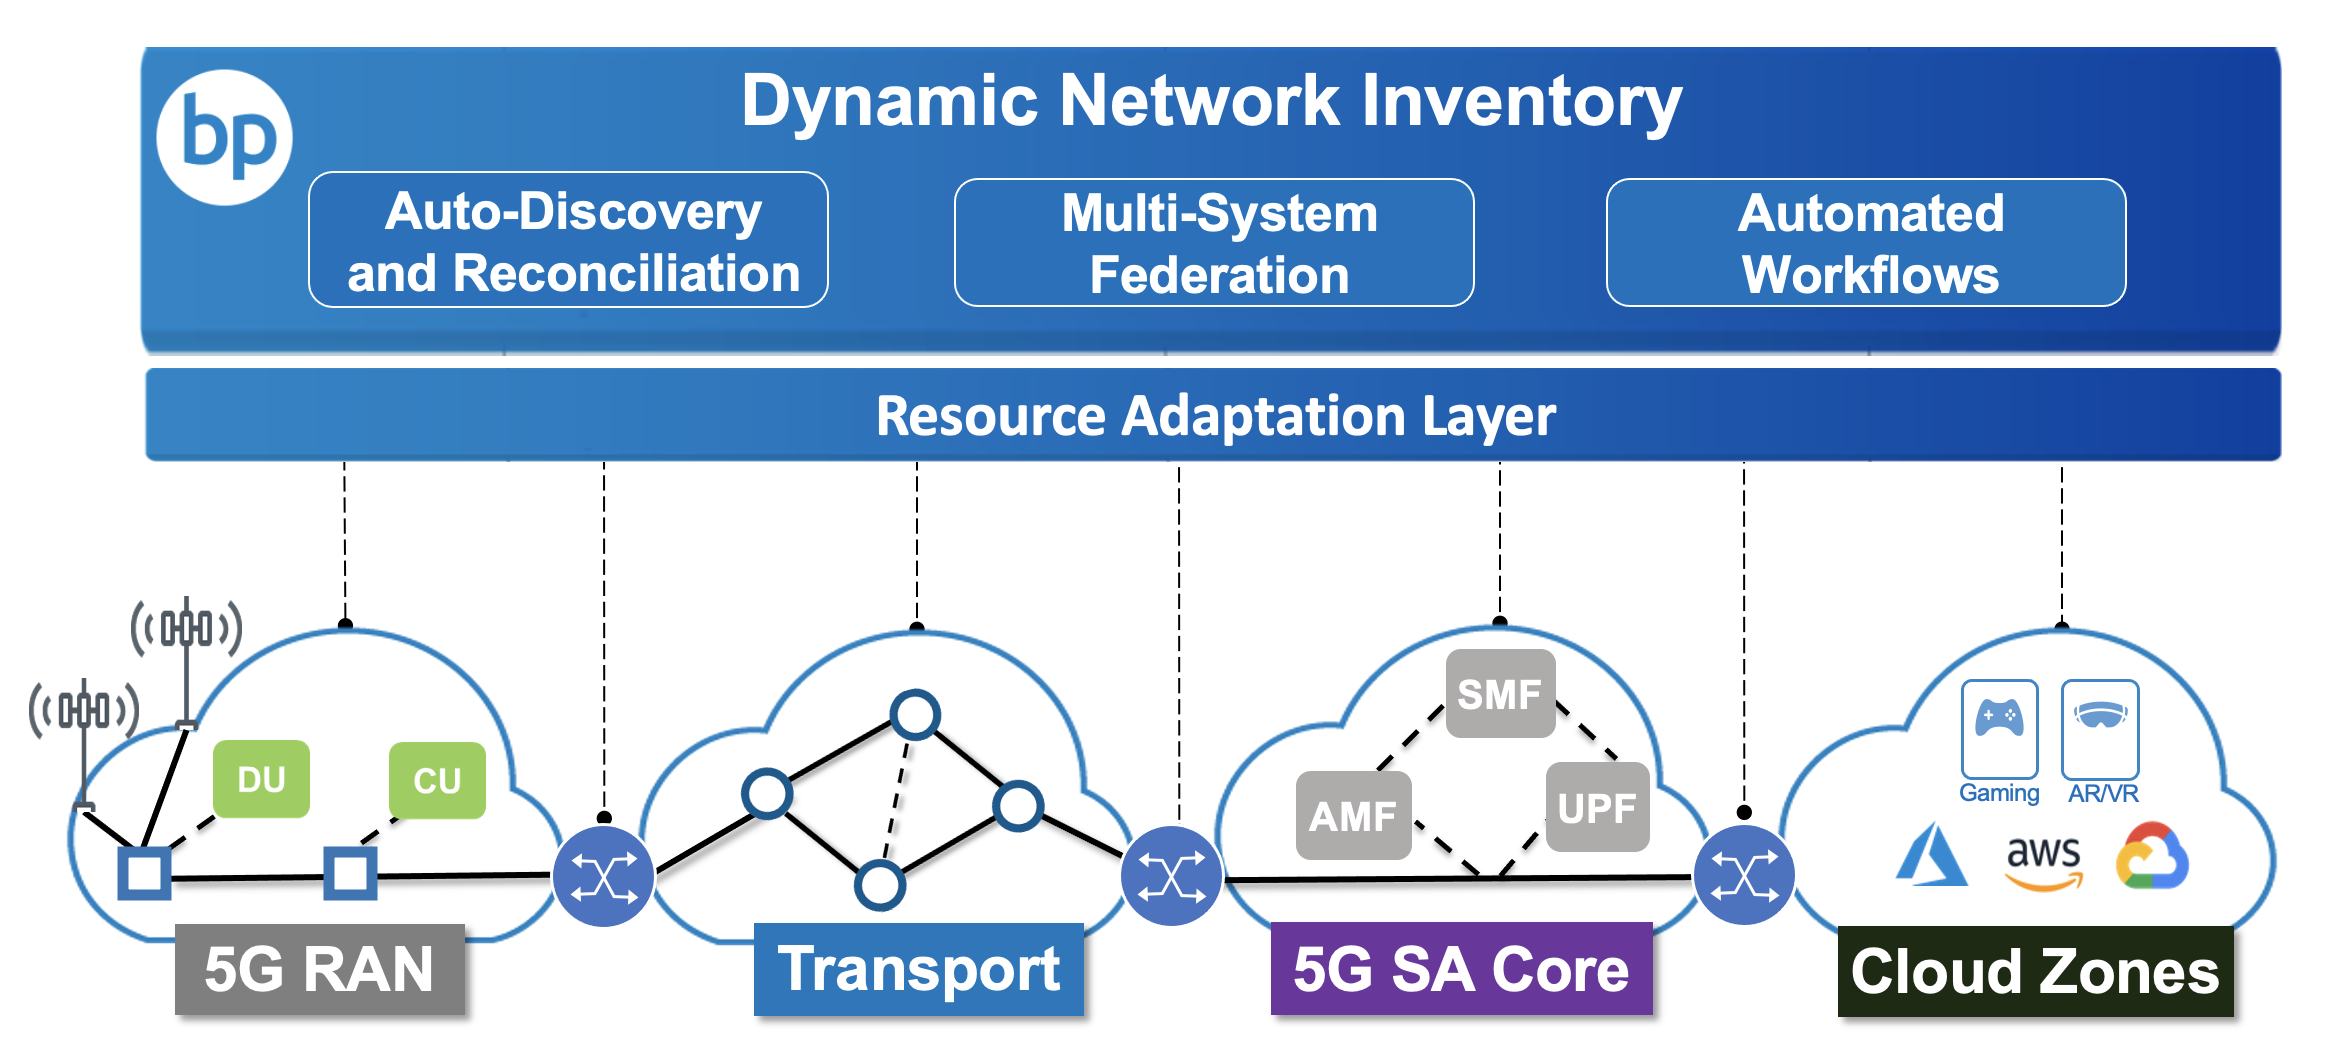 5G Update - Dynamic Inventory Diagram